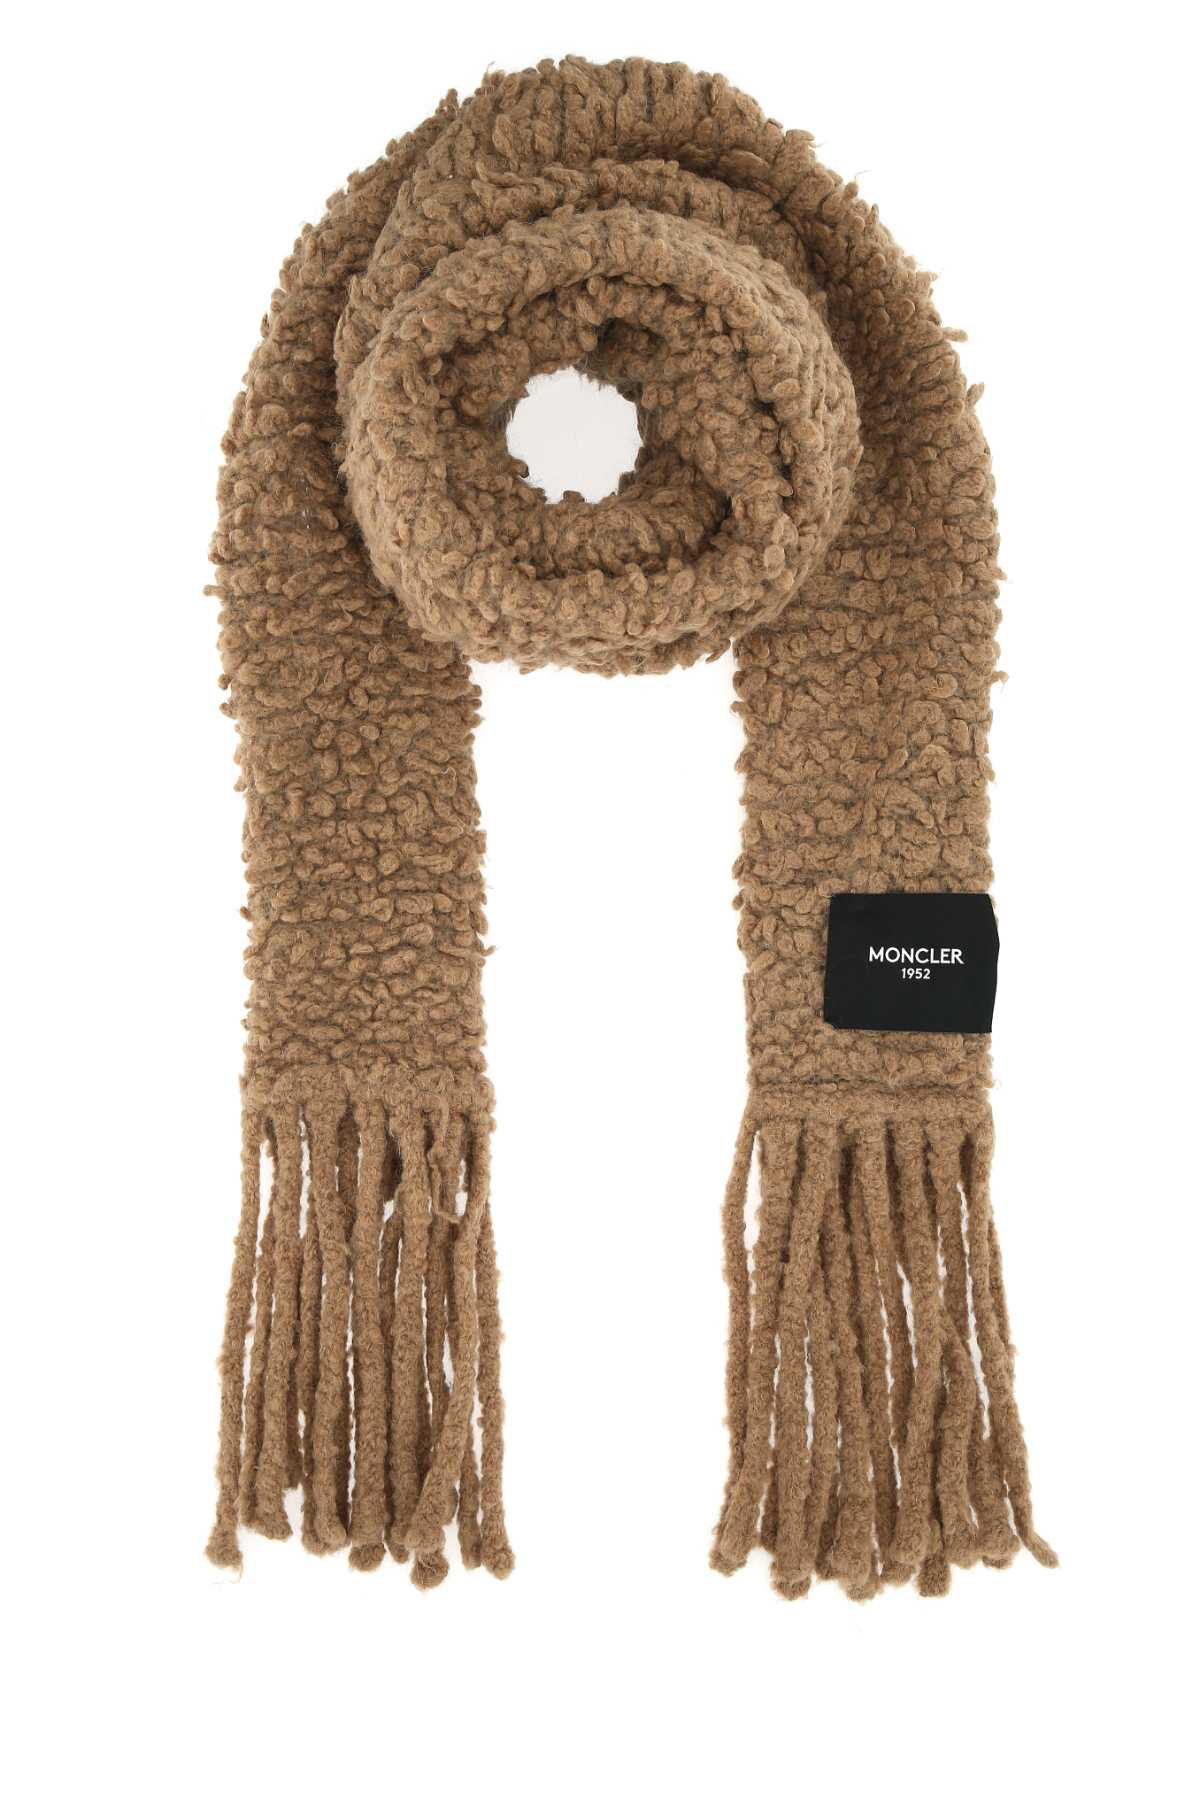 Biscuit 2 Moncler 1952 Scarf